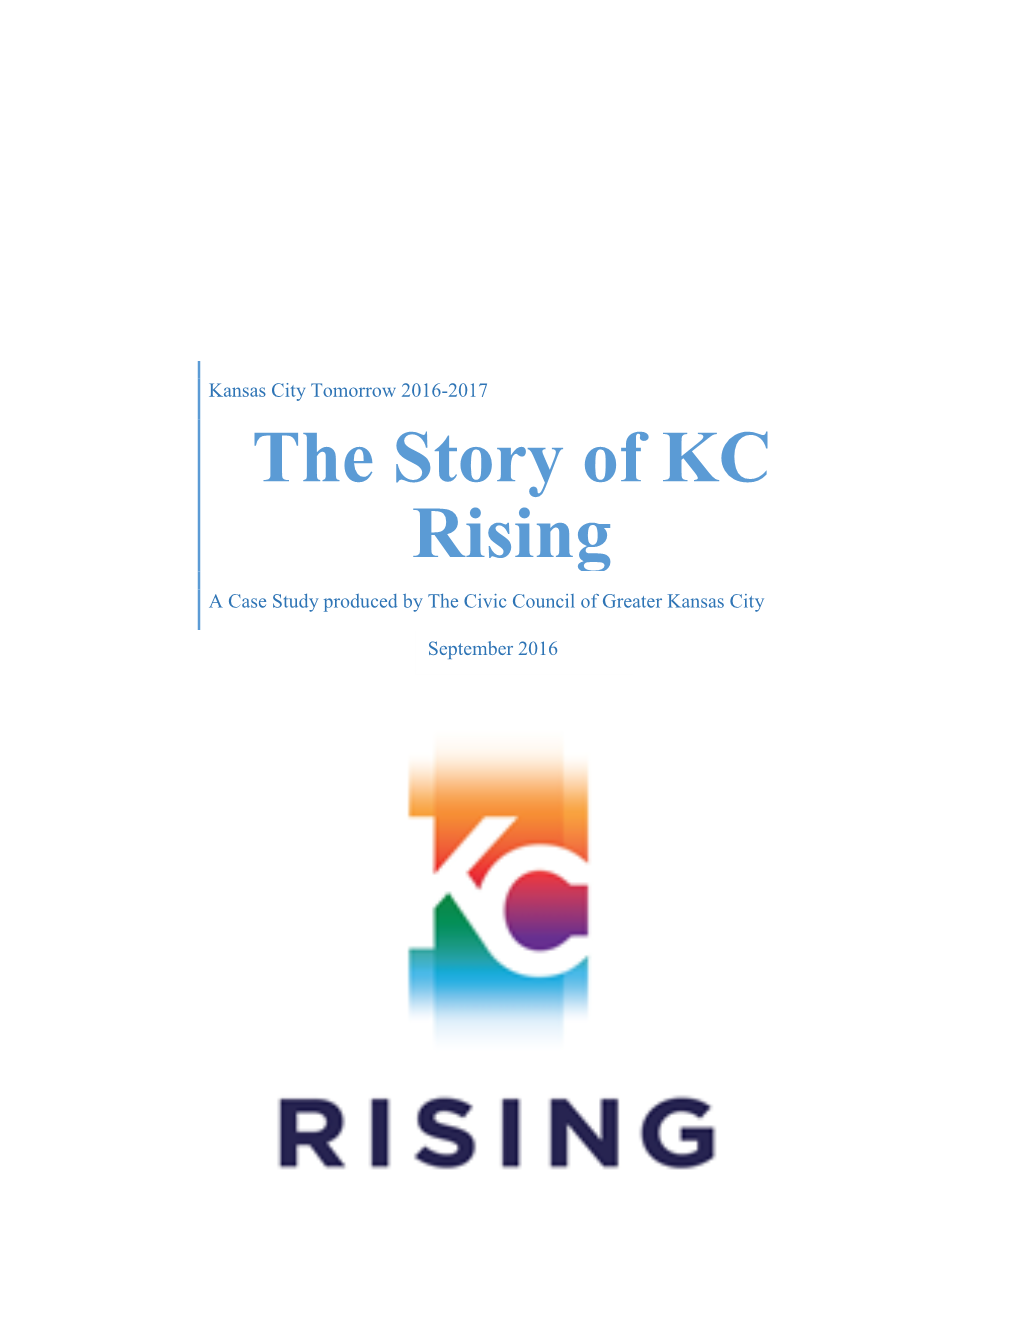 The Story of KC Rising a Case Study Produced by the Civic Council of Greater Kansas City